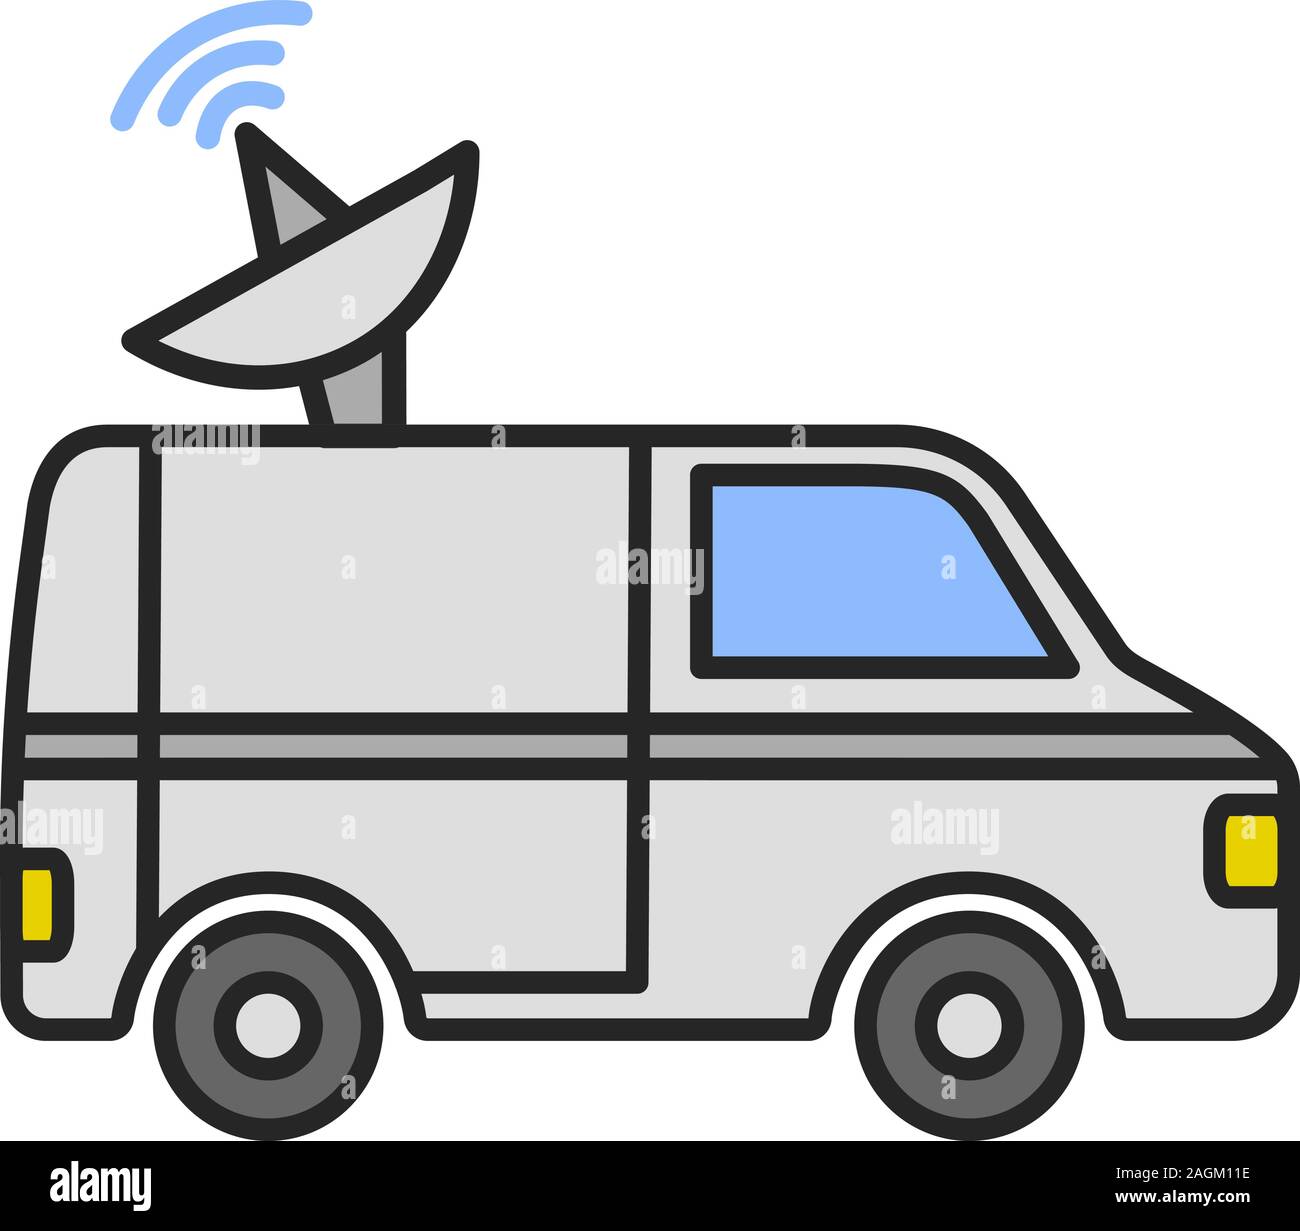 News van color icon. Satellite truck. Remote television broadcasting. Isolated vector illustration Stock Vector